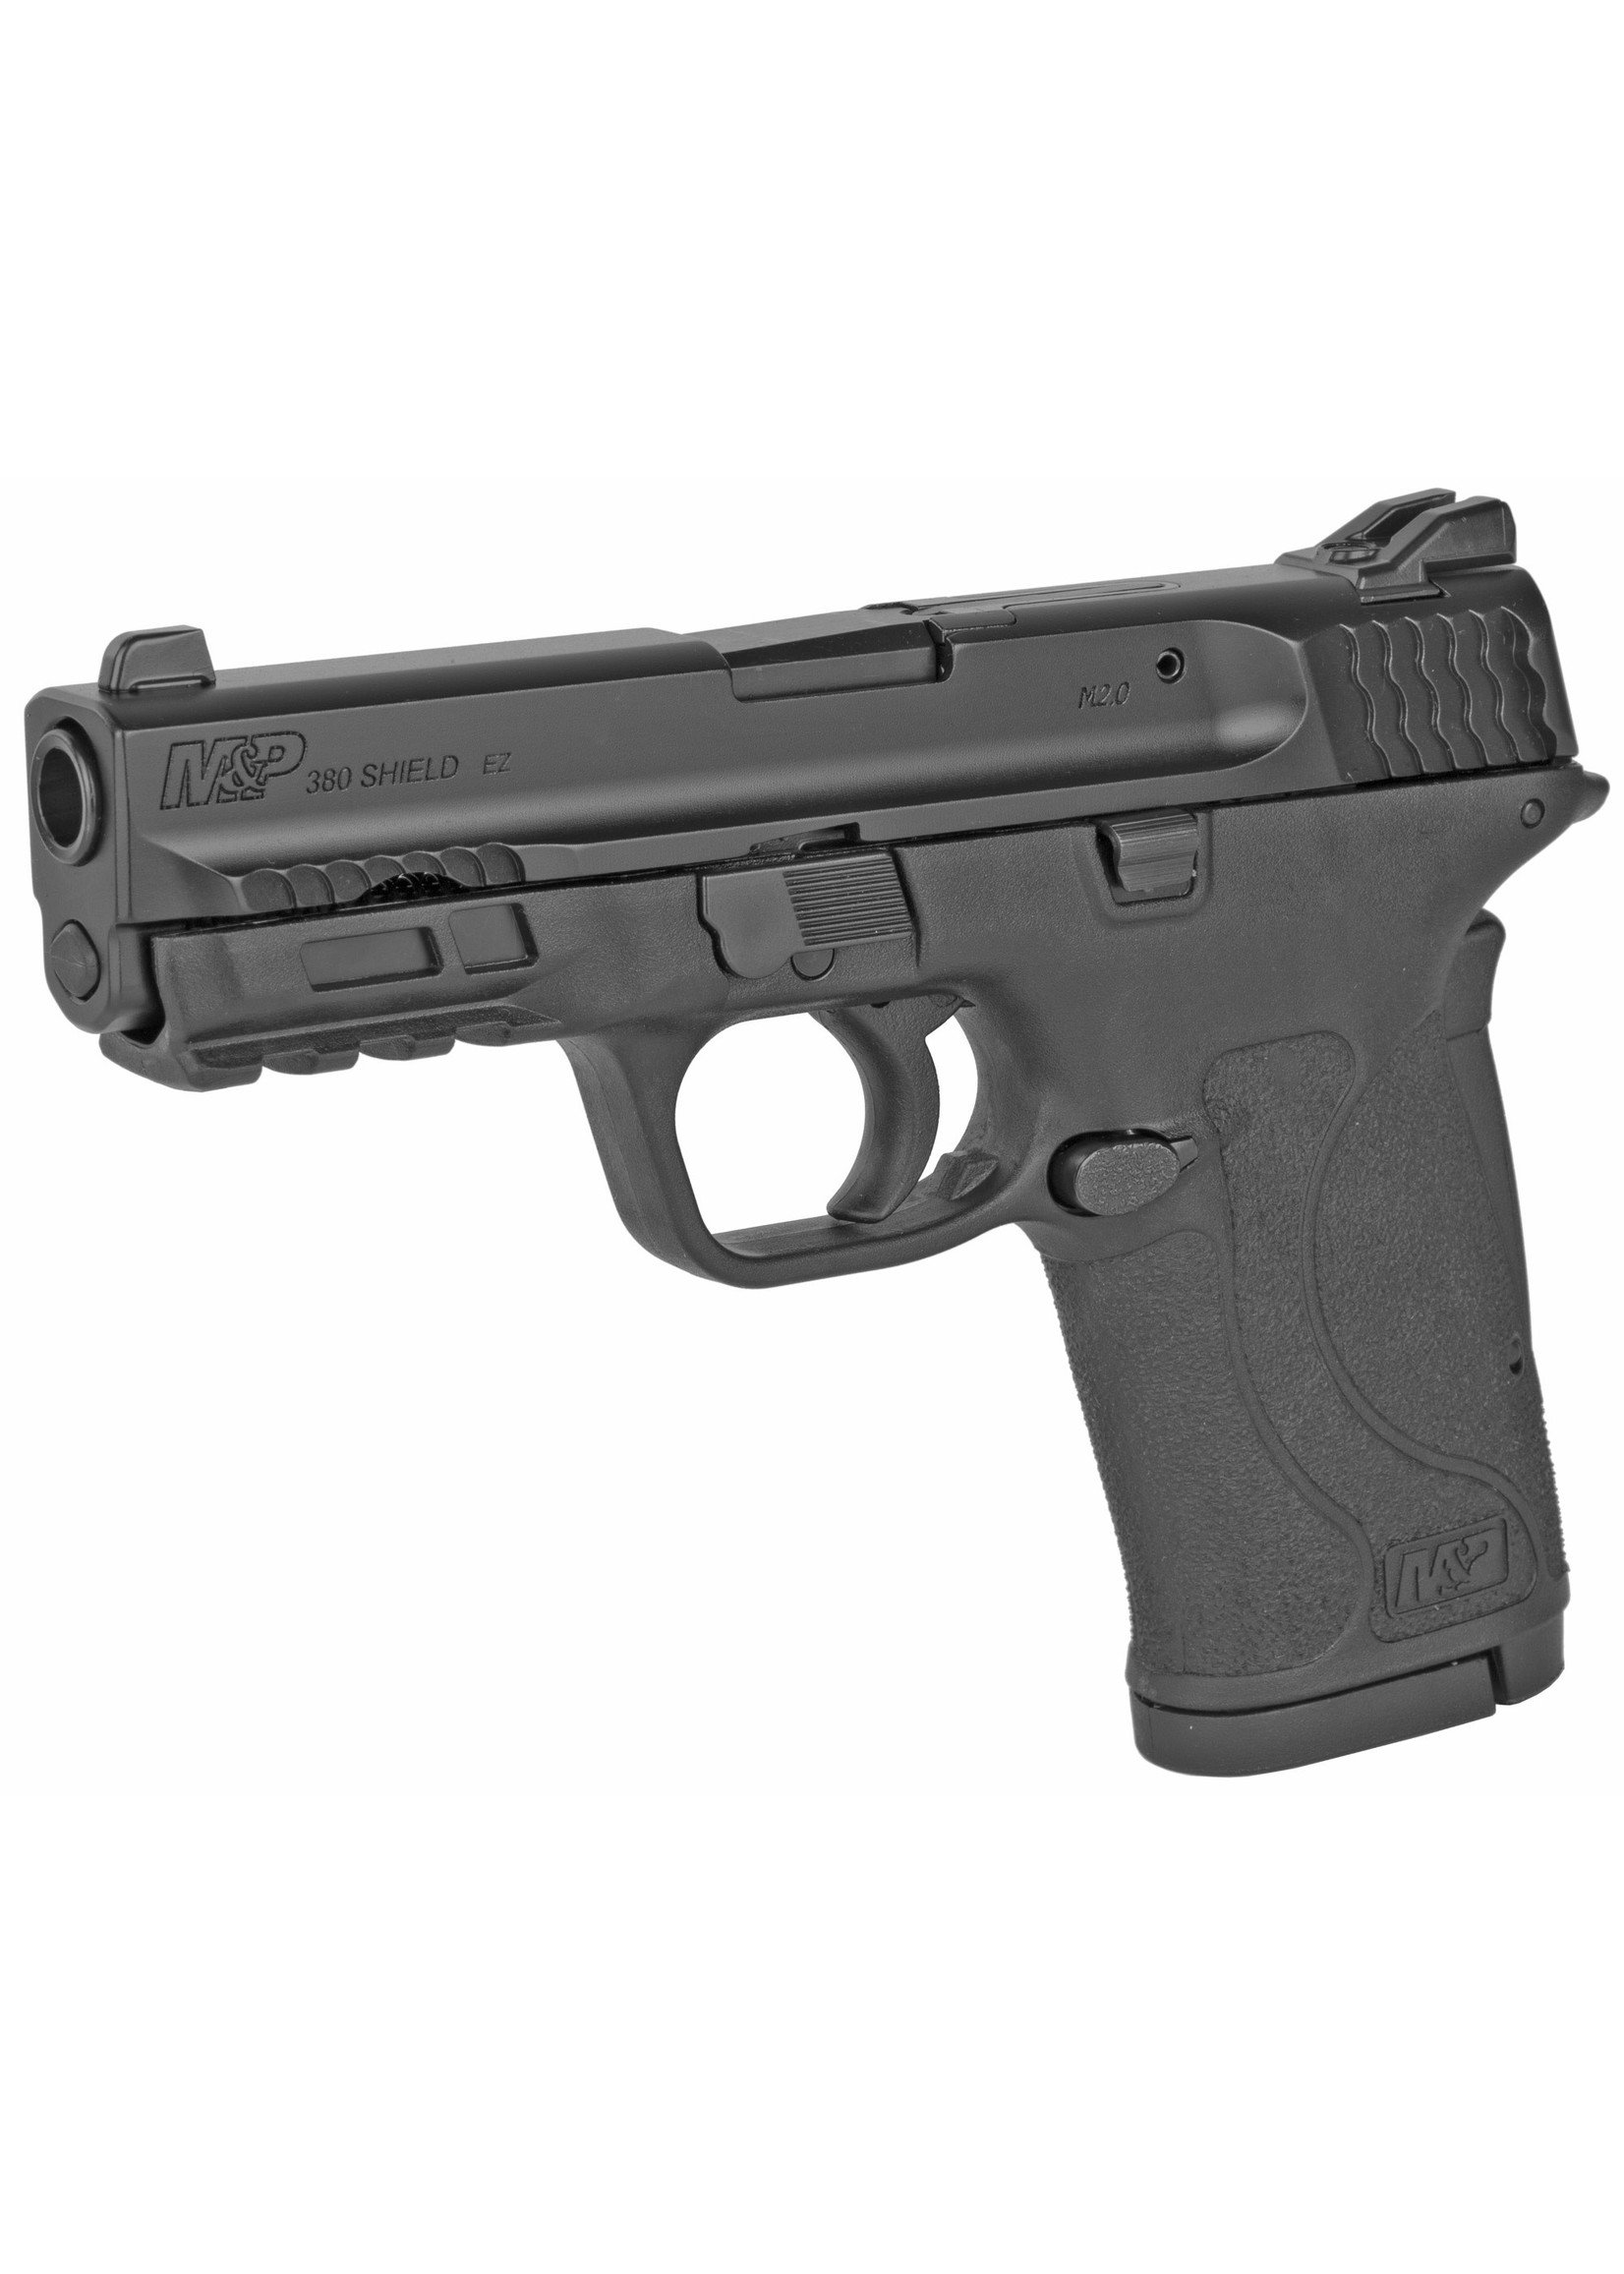 Smith and Wesson (S&W) Smith & Wesson, M&P380 Shield EZ M2.0, Internal Hammer Fired, Semi-automatic, Polymer Frame Pistol, Micro-Compact, 380ACP, 3.68" Barrel, Armornite Finish, Black, 3 Dot Sights, 8 Rounds, 2 Magazines